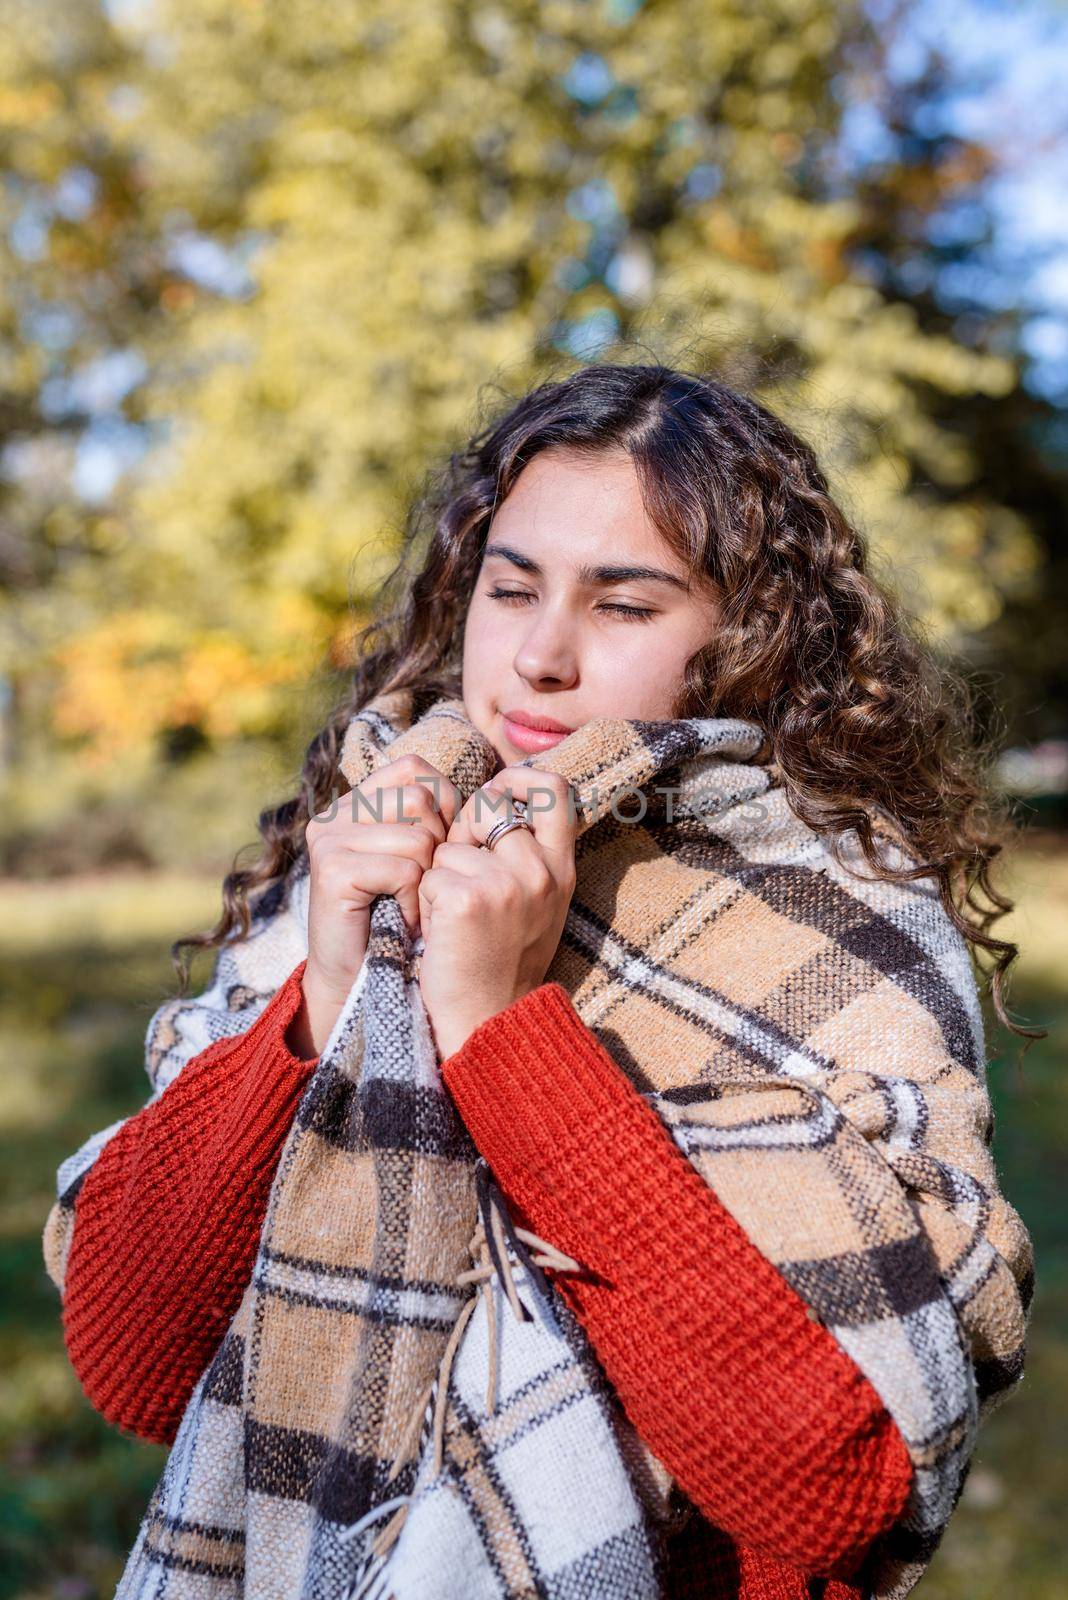 Autumn nature. Portrait of young happy woman in warm plaid in autumn forest